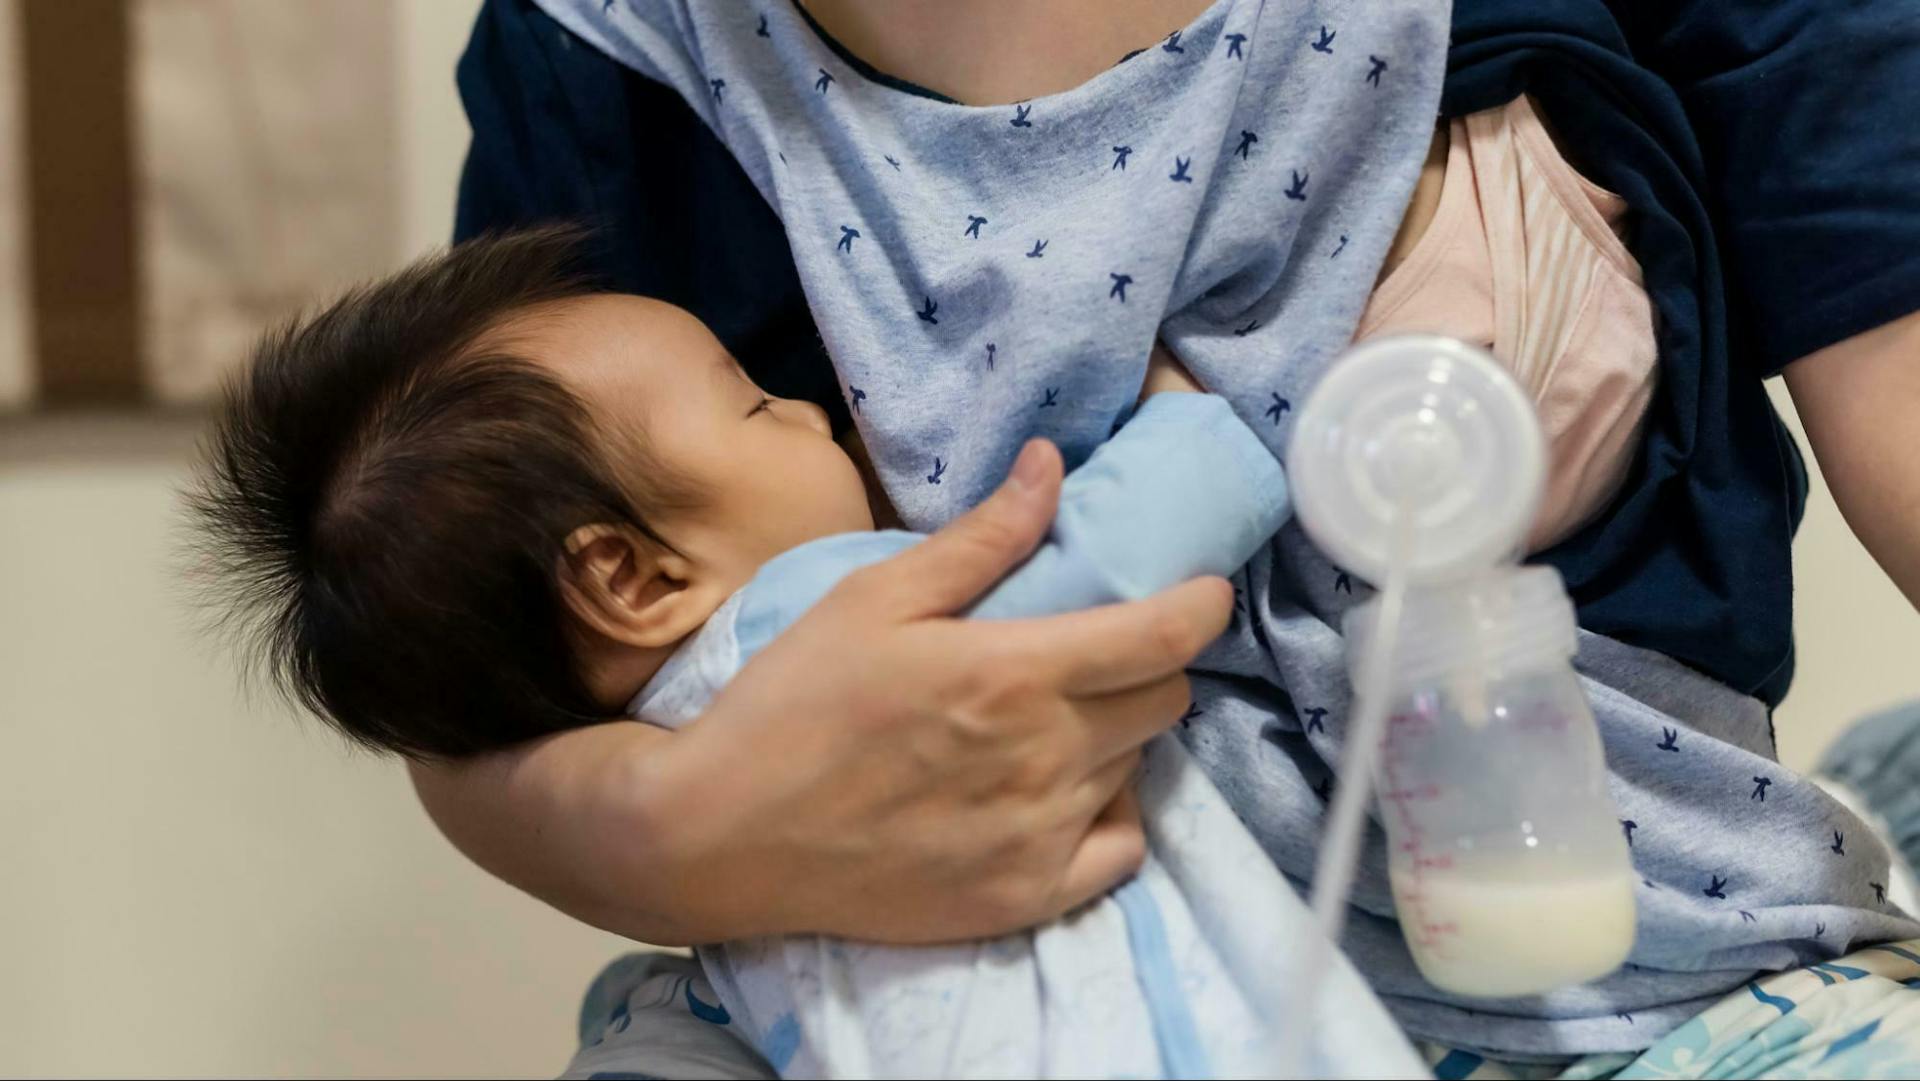 How to increase breast milk supply